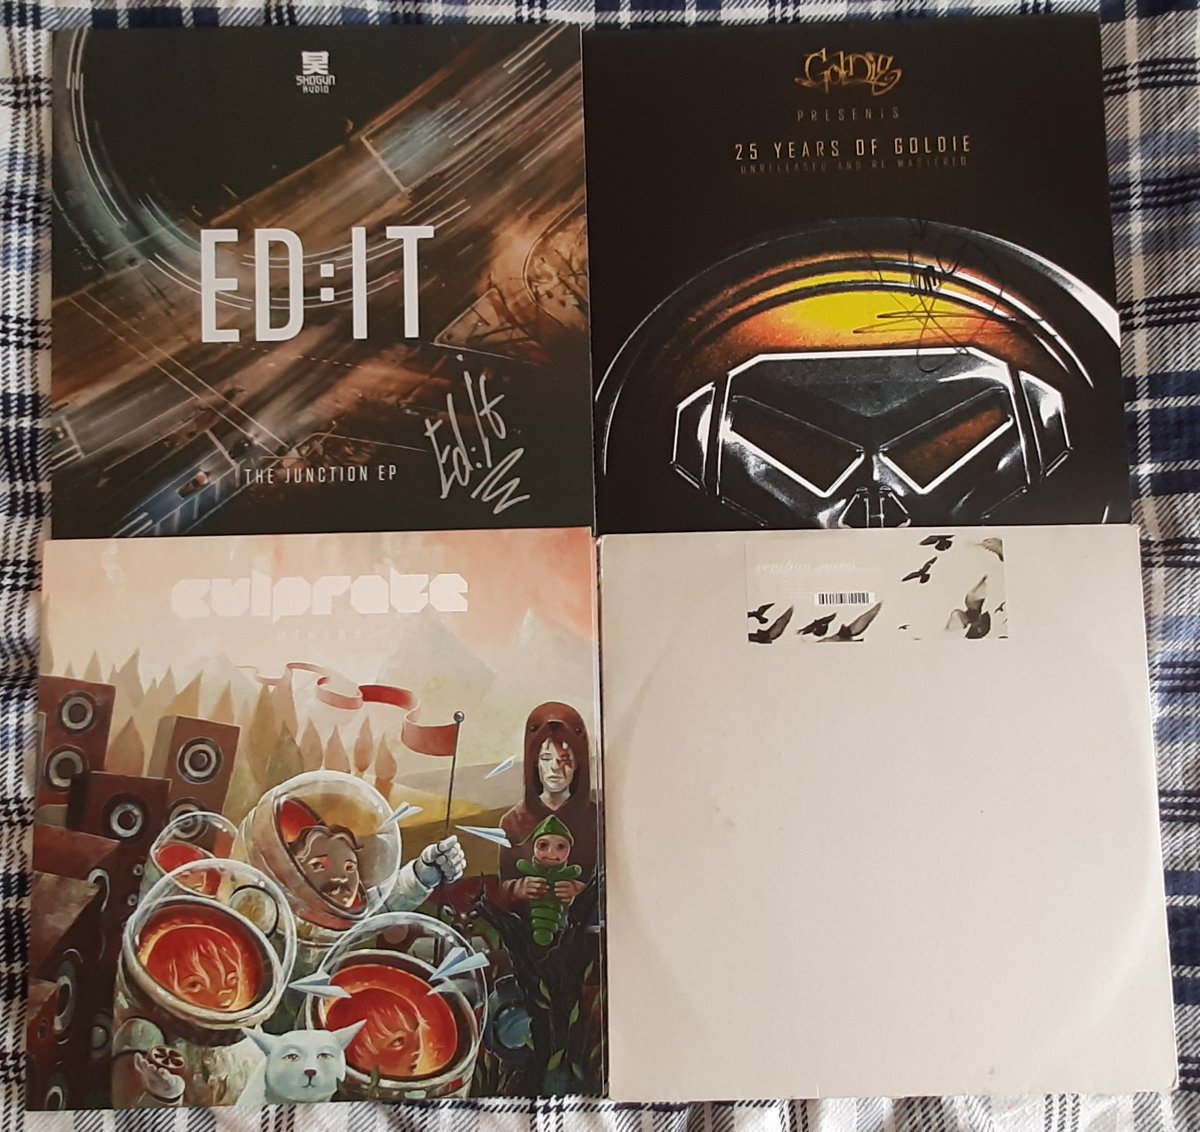 ED:IT - The Junction Metalheadz - 25 Years of GoldieCulprate - Others Venetian Snares - Rossz csillag alatt születettOverlook - All of Them Witches art-aud - Secret Rave 04Noisia - Outer Edges Good Looking Records - Points in Time 003